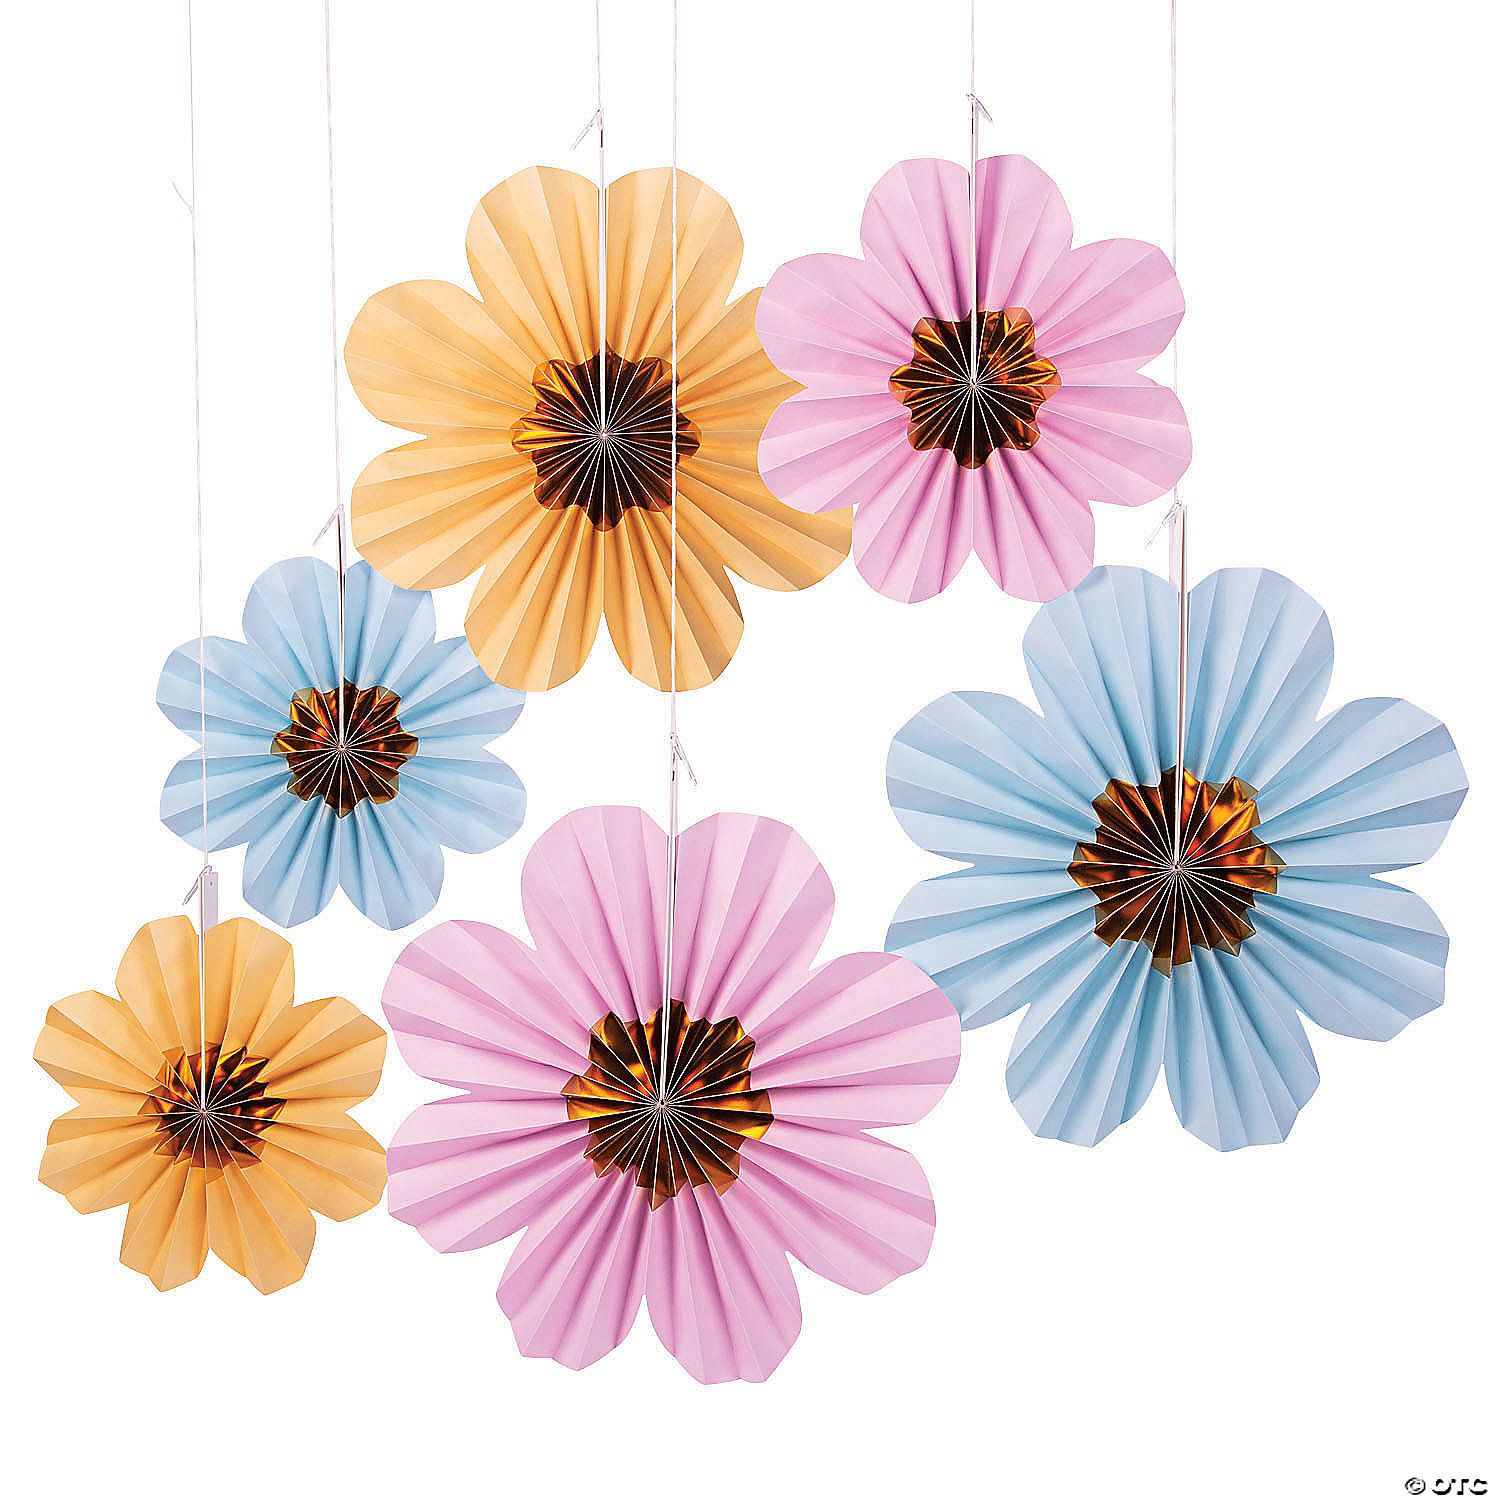 10" - 14" Pastel Daisy Hanging Paper Fans - 6 Pc. | Oriental Trading Company